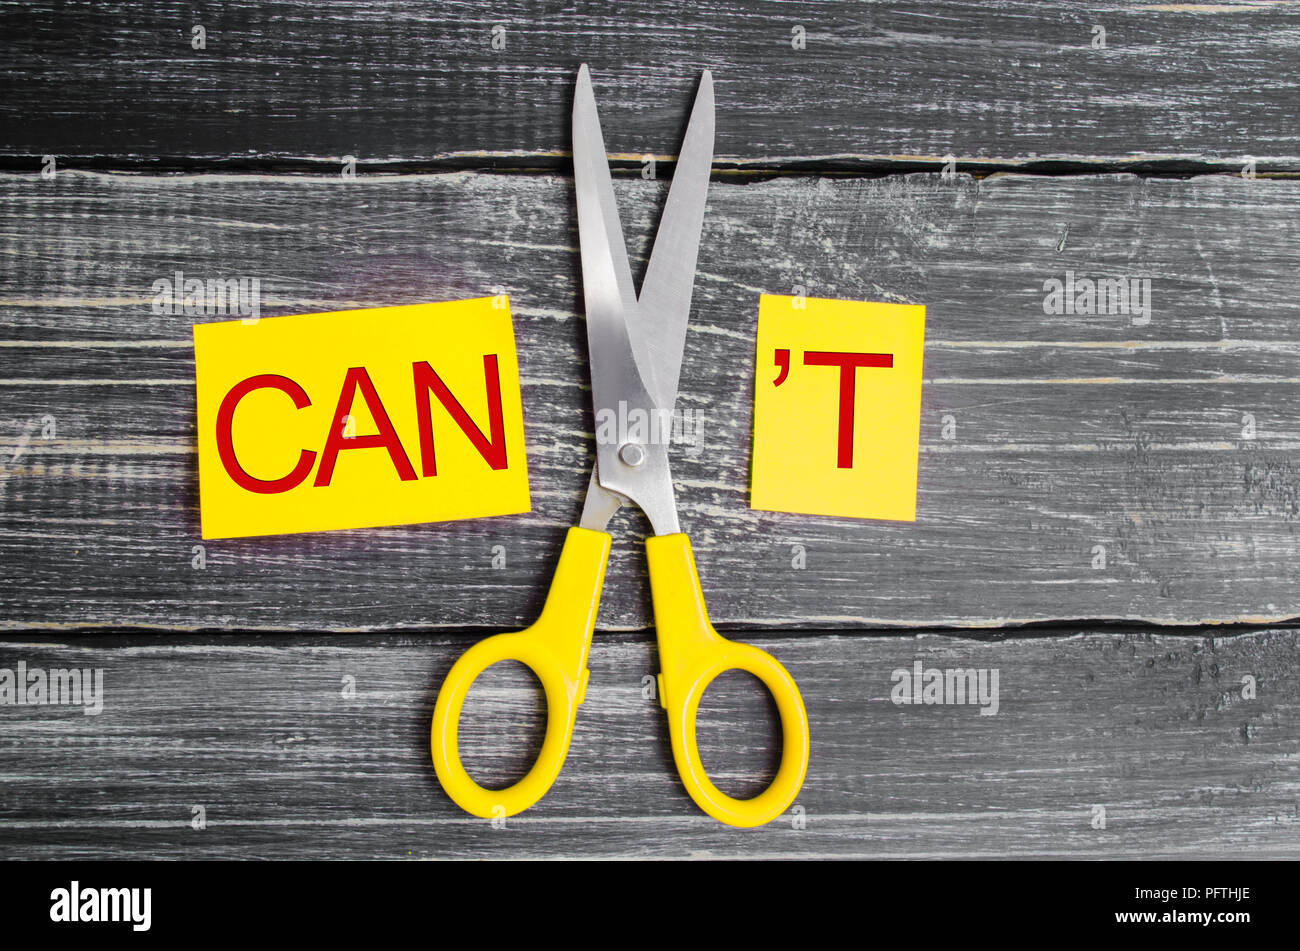 I can self motivation - cutting the letter t of the written word I can't so it says I can, goal achievement, potential, overcoming Stock Photo